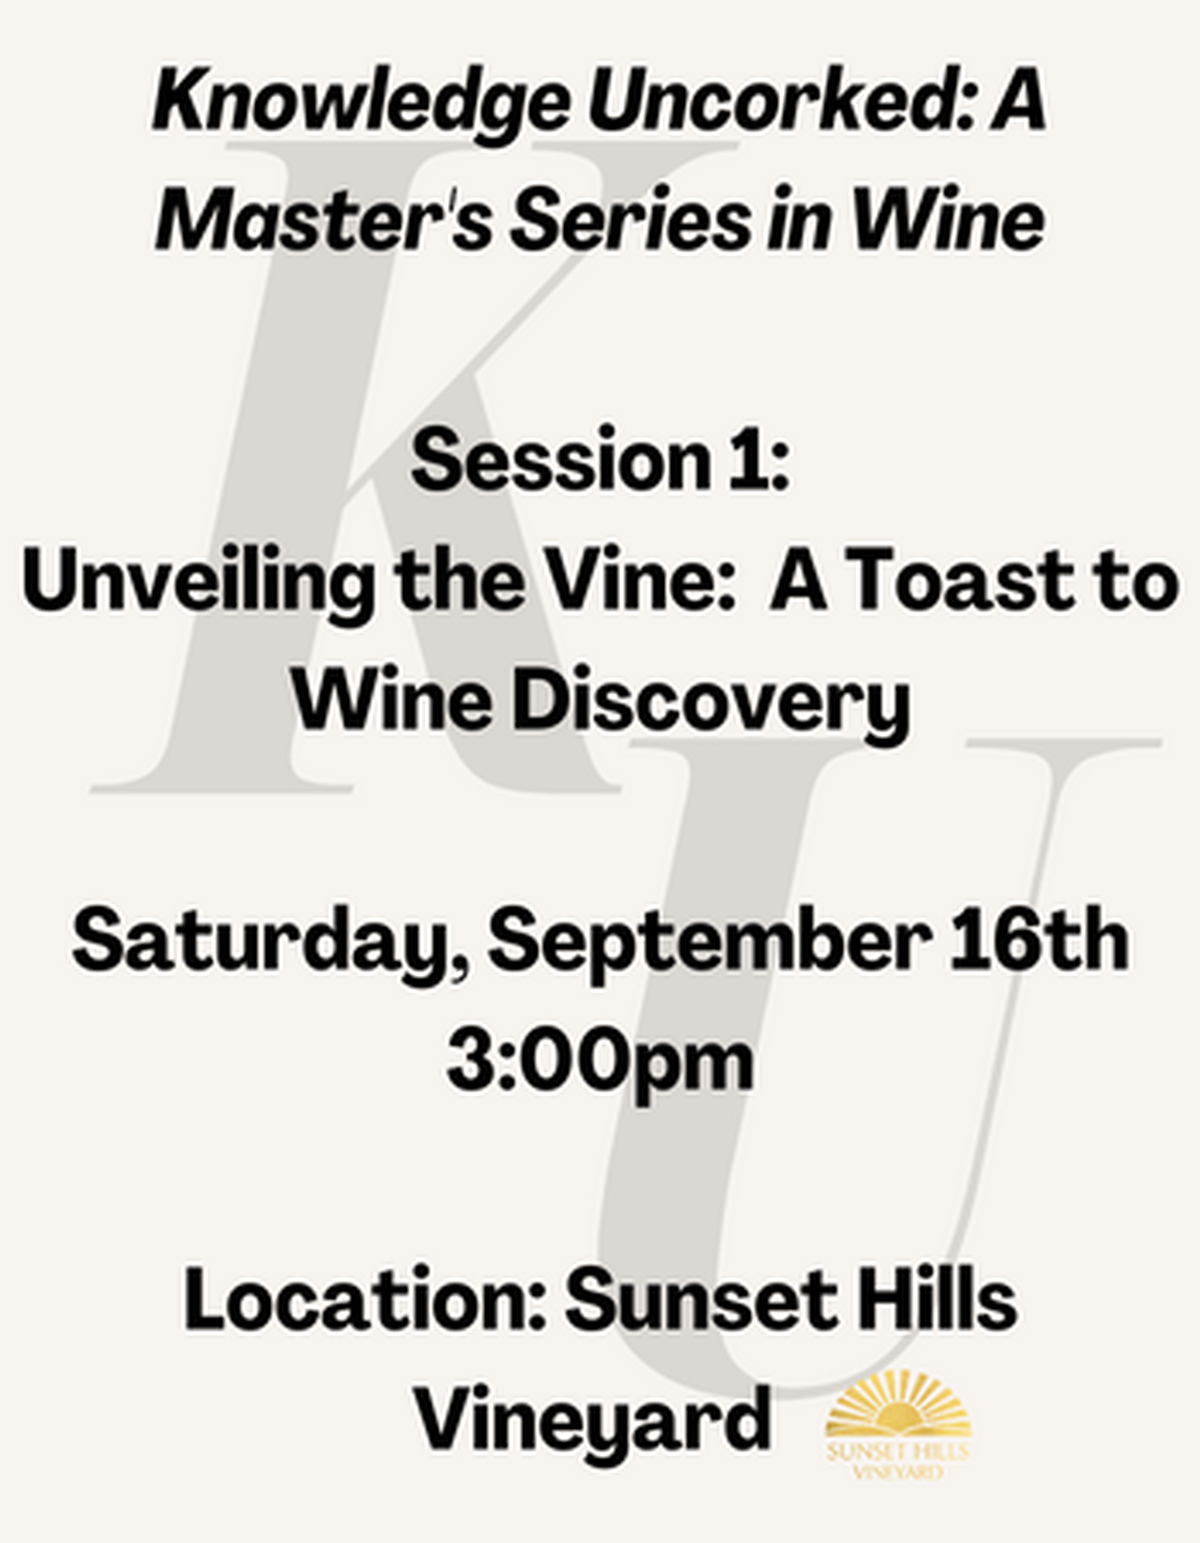 Unveiling the Vine: A Toast to Wine Discovery (3:00pm)